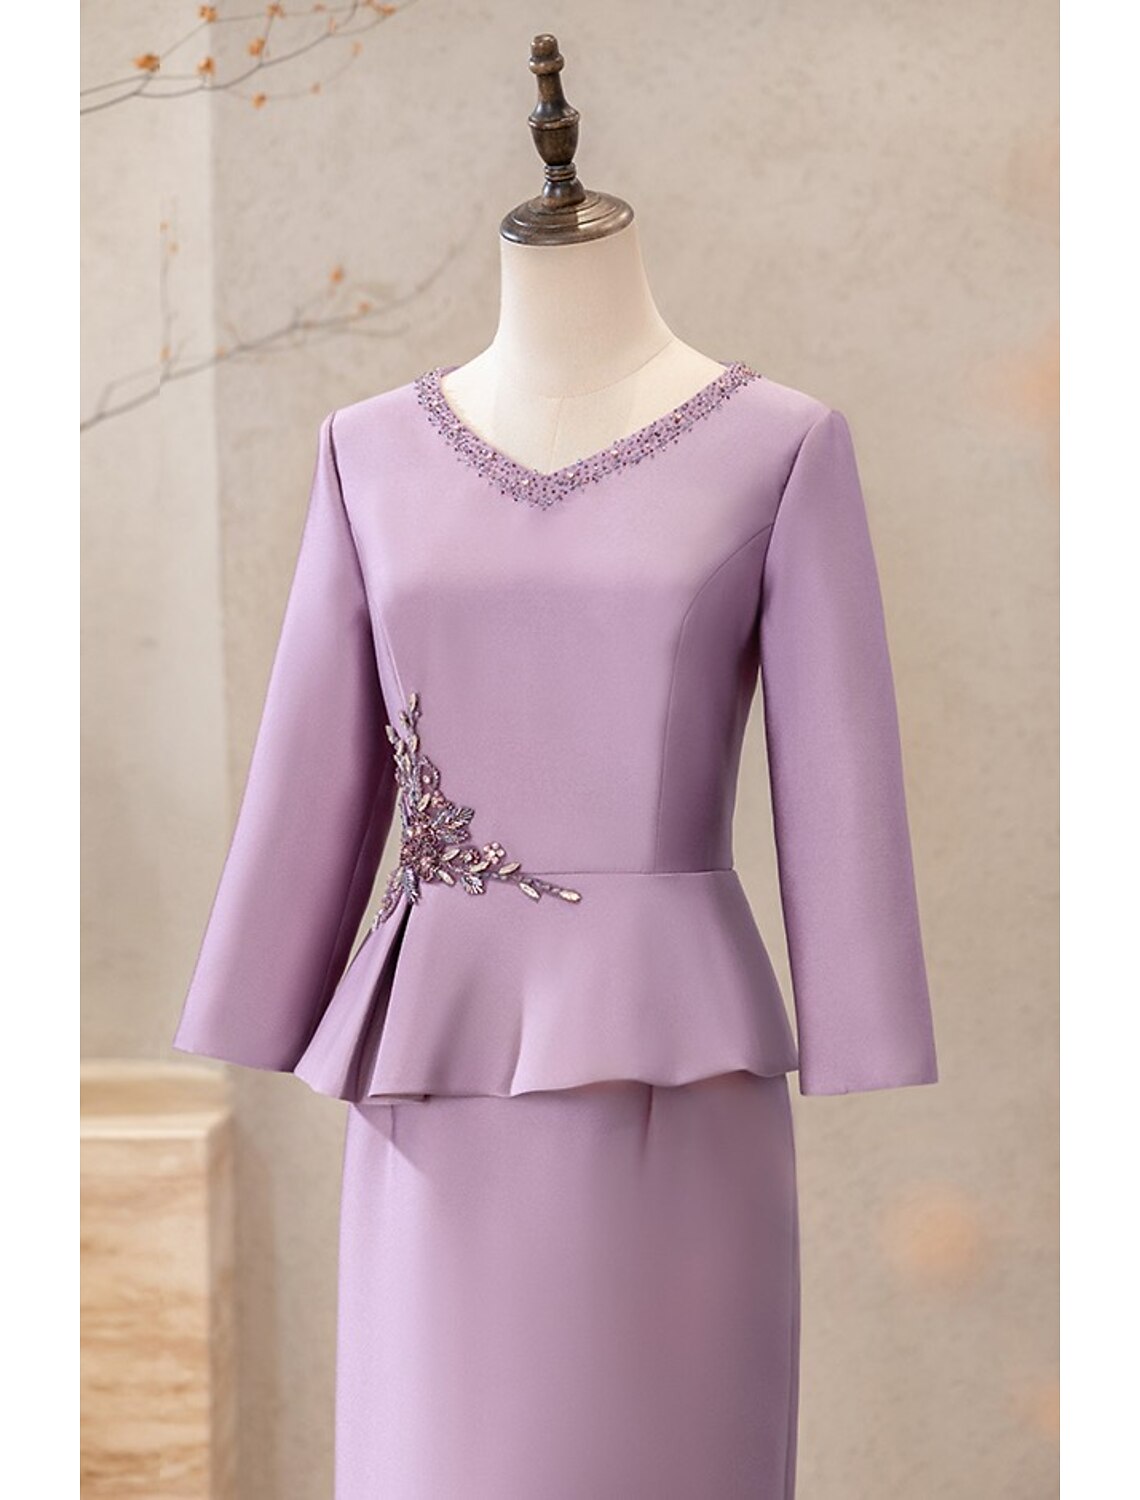 Two Piece Cocktail Dresses Elegant Dress Wedding Party Tea Length Long Sleeve V Neck Satin with Appliques